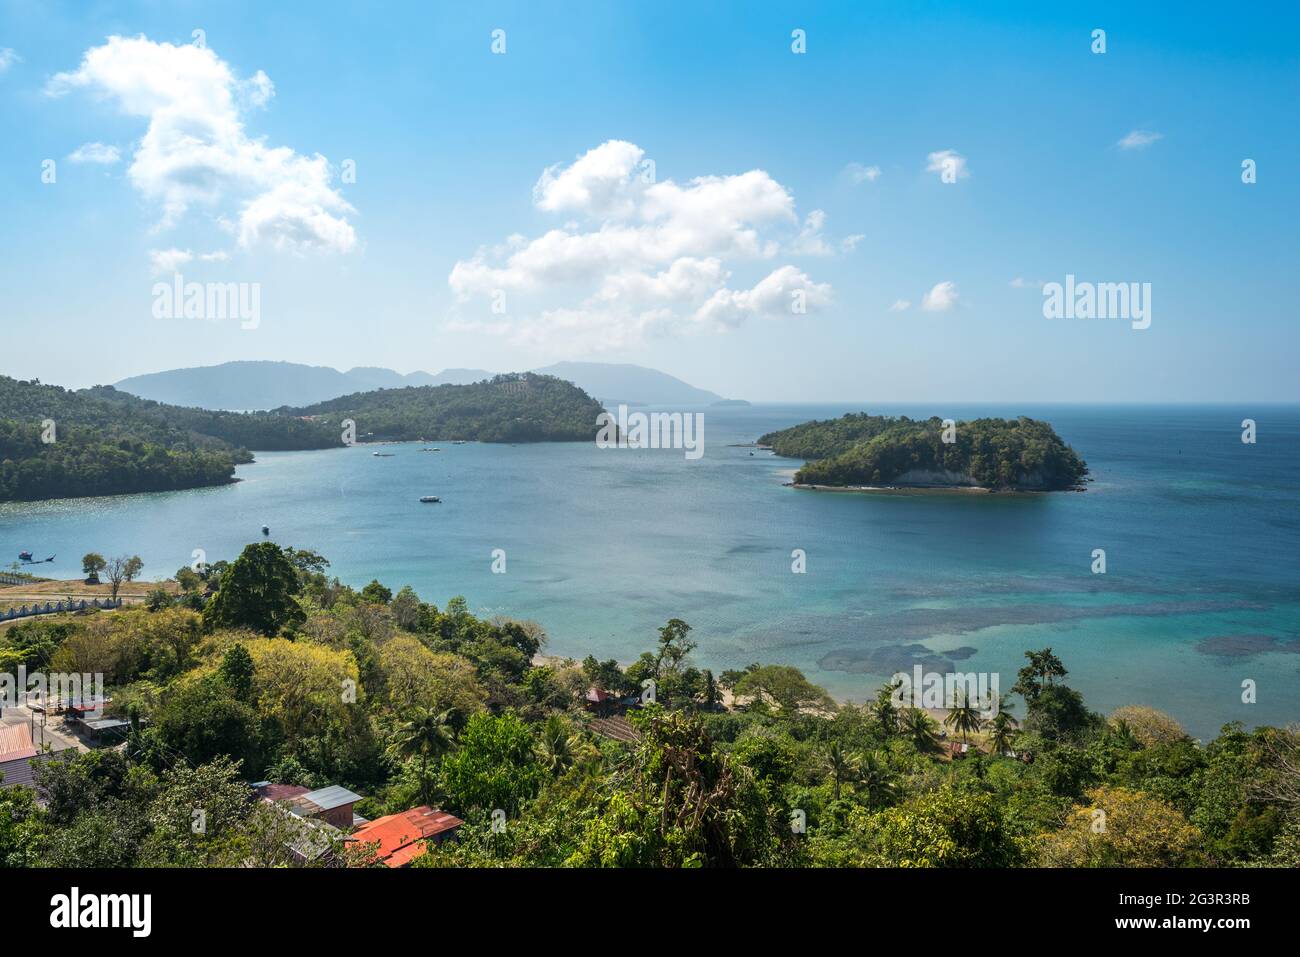 The island of Weh in the north of Sumatra, Indonesia Stock Photo